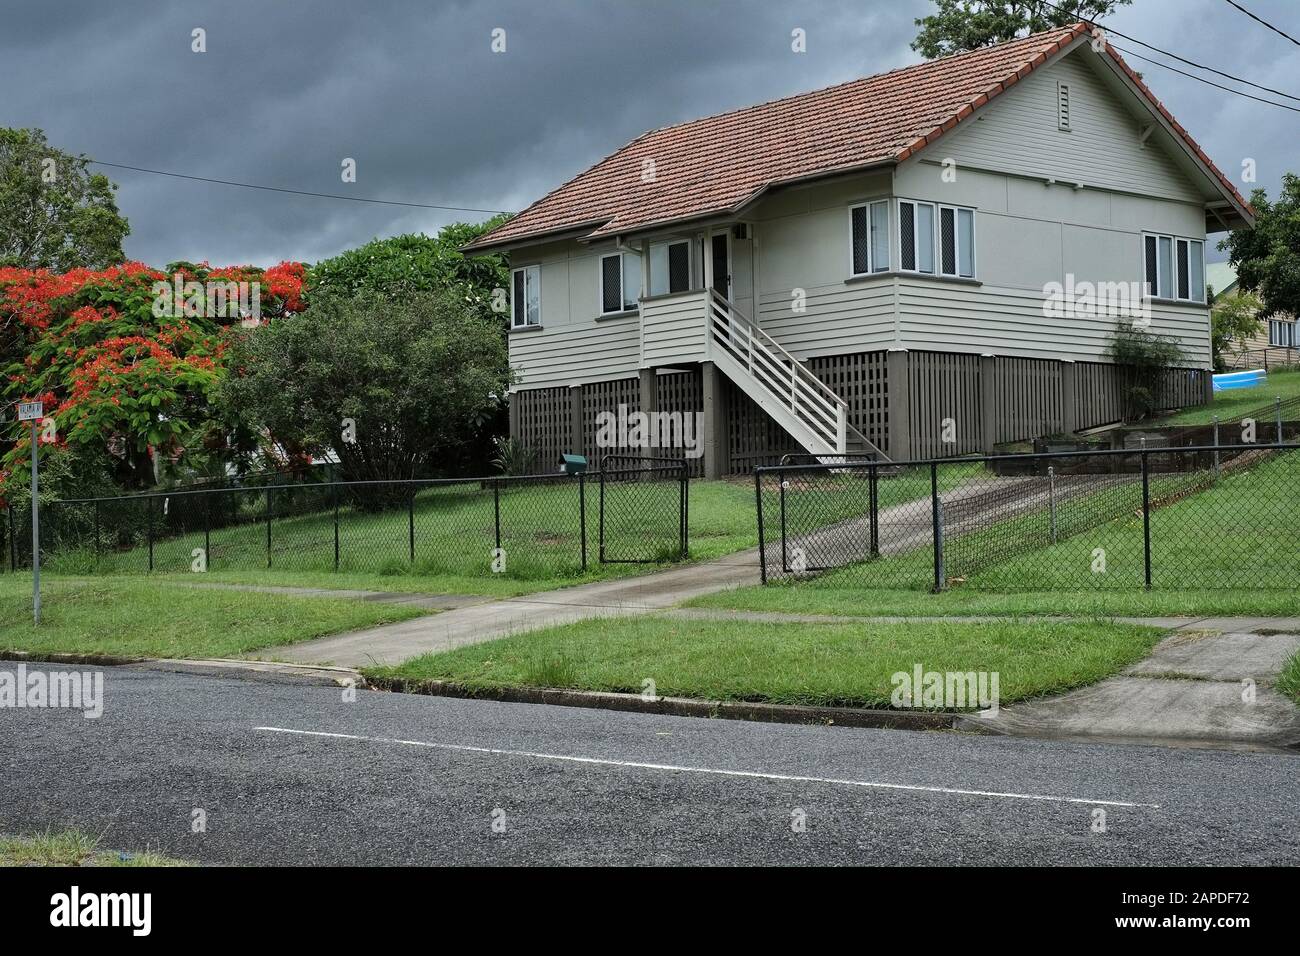 Lush green grassy front yard and a typical box shaped fibro and weatherboard post-war workers house with a poinsettia tree, Camp Hill, Brisbane Stock Photo